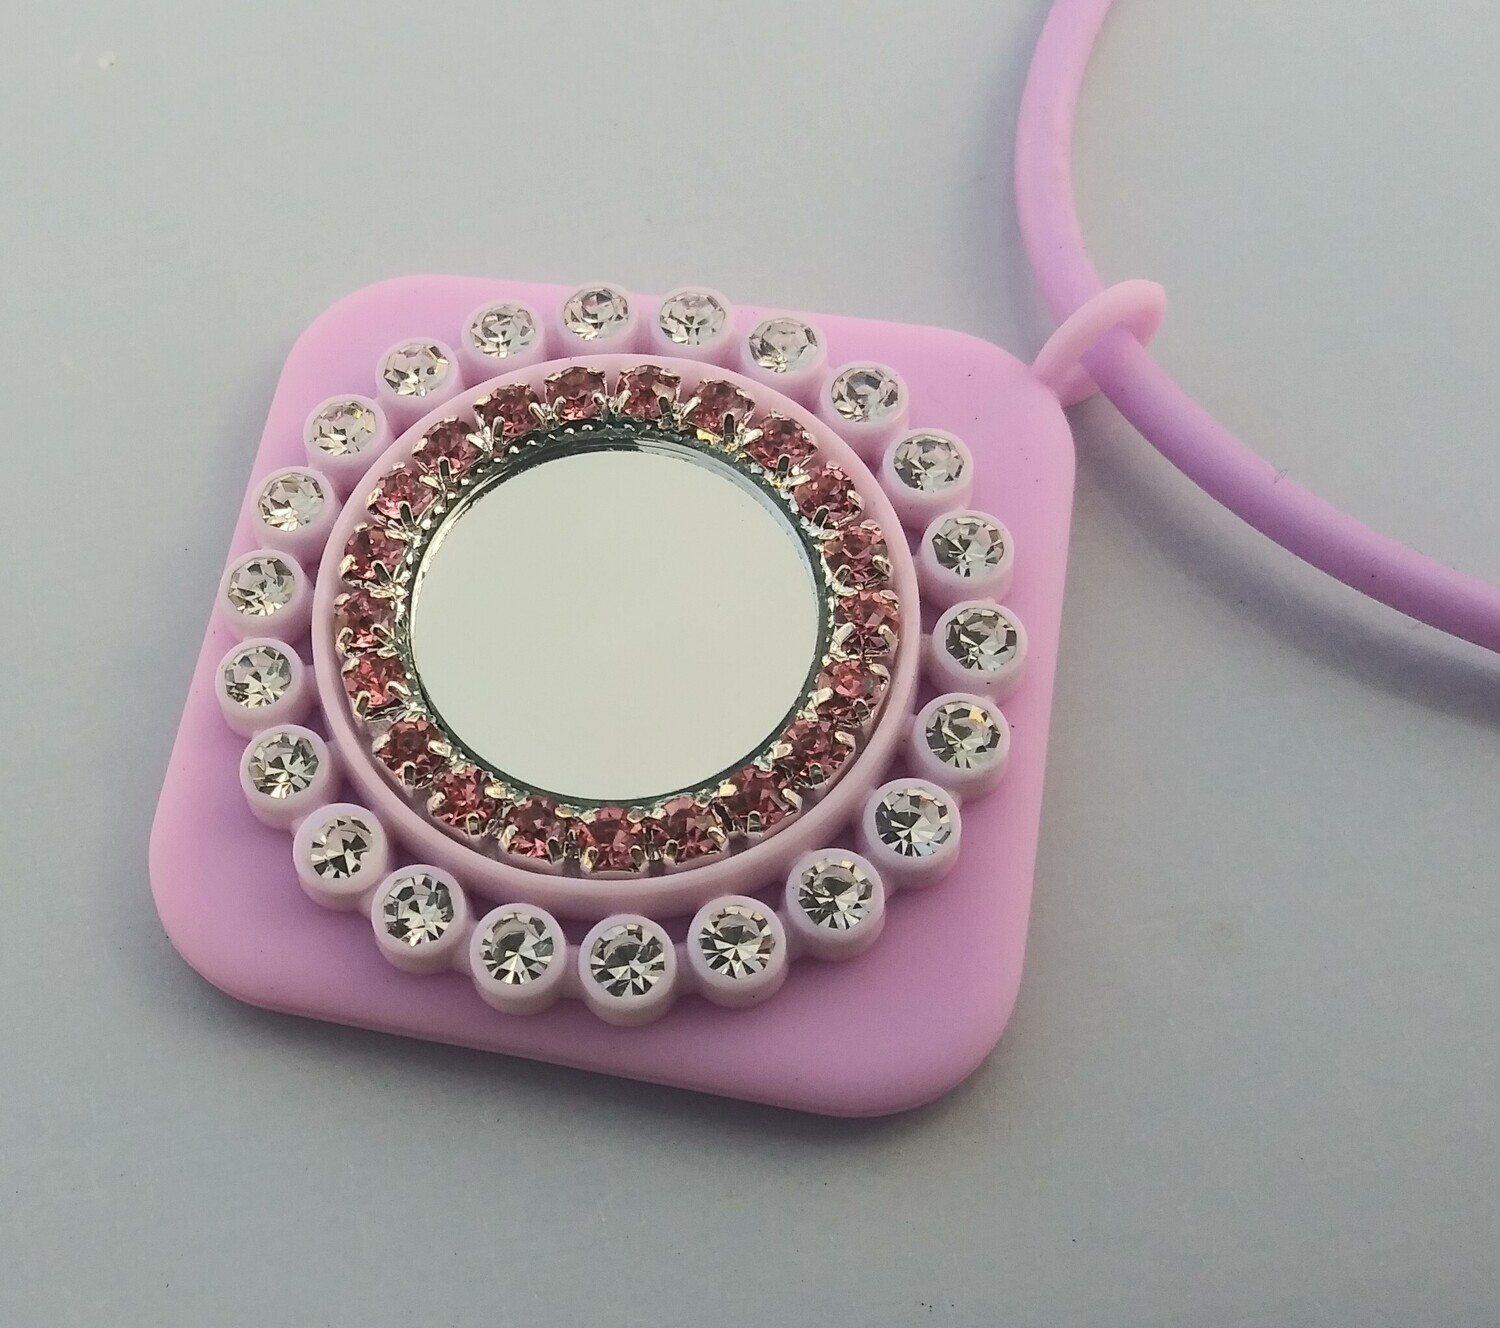 Double rings of rhinestones on pink square stretch rubber necklace